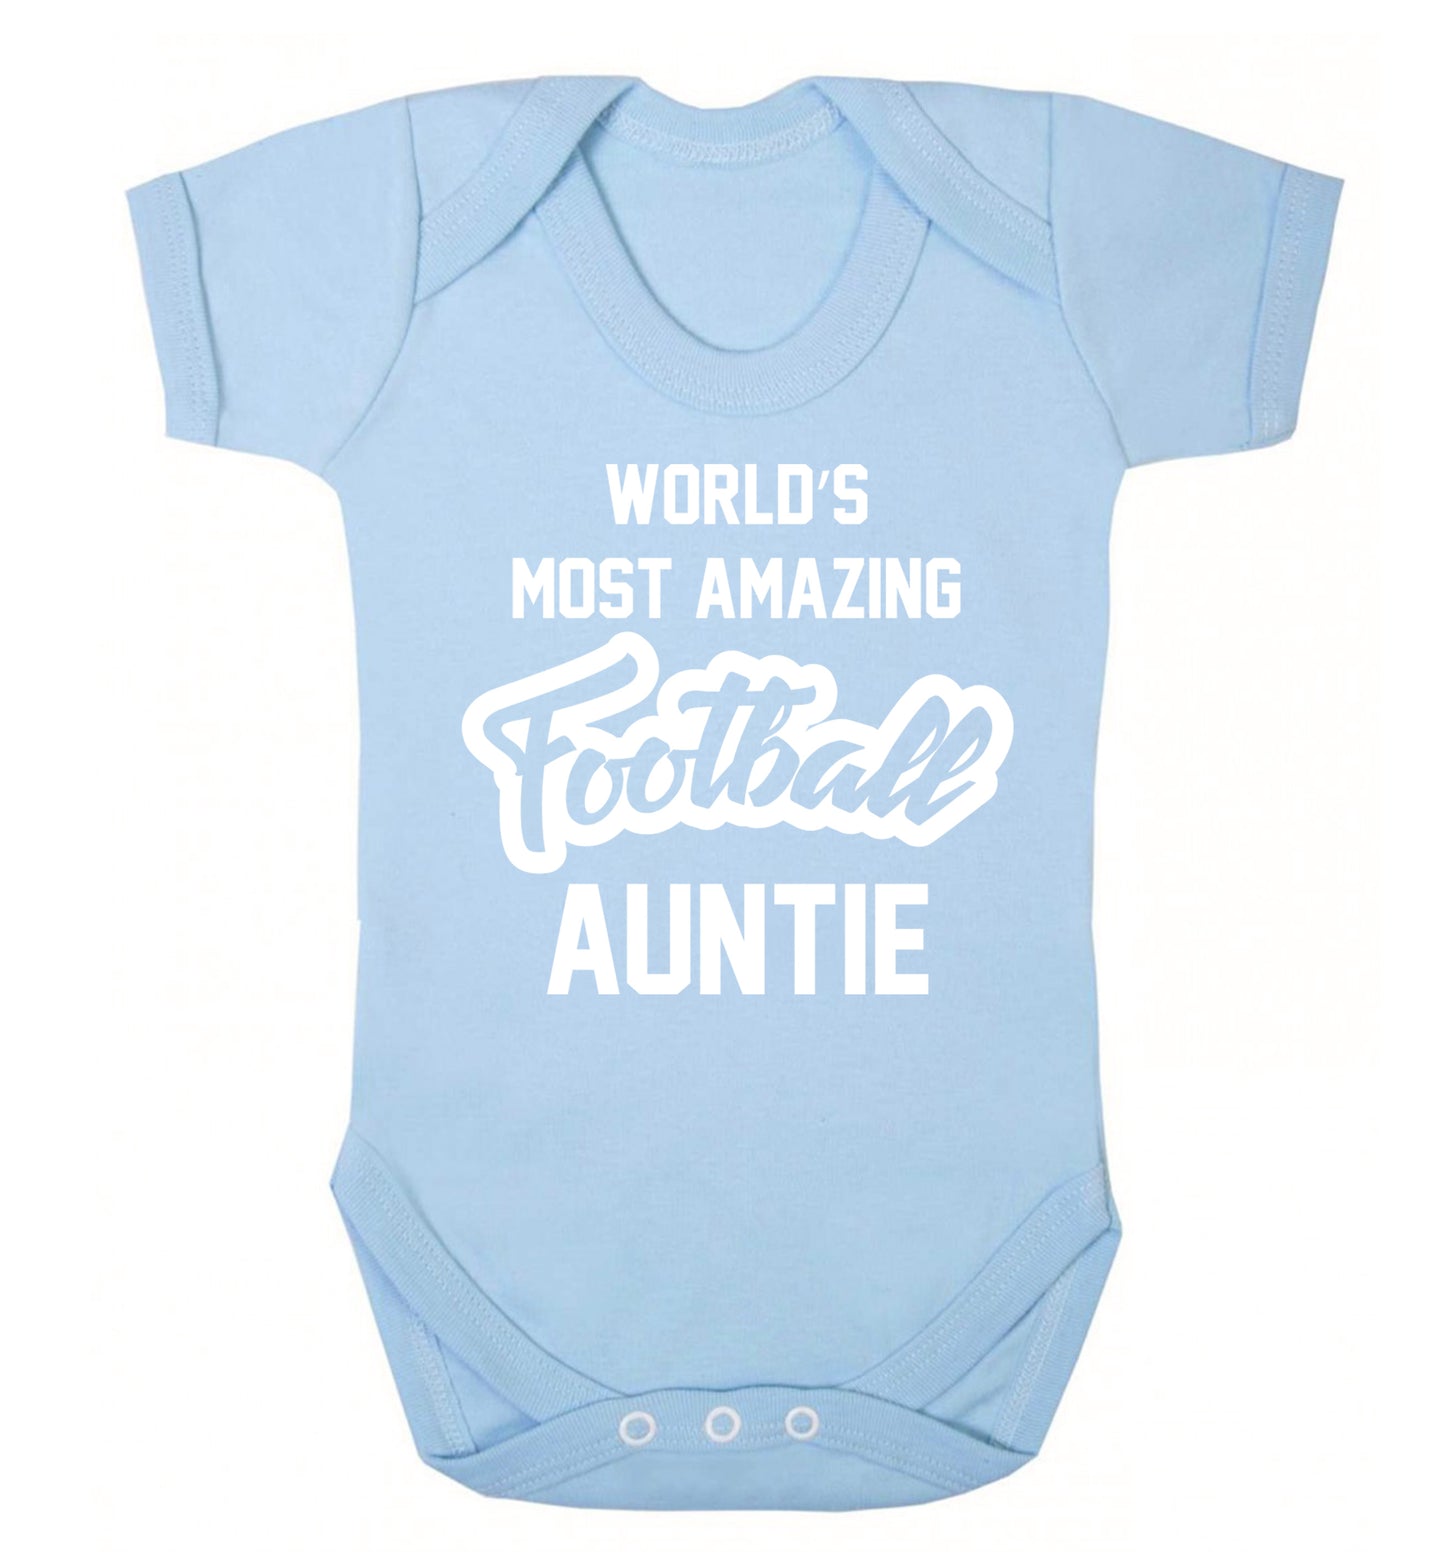 Worlds most amazing football auntie Baby Vest pale blue 18-24 months